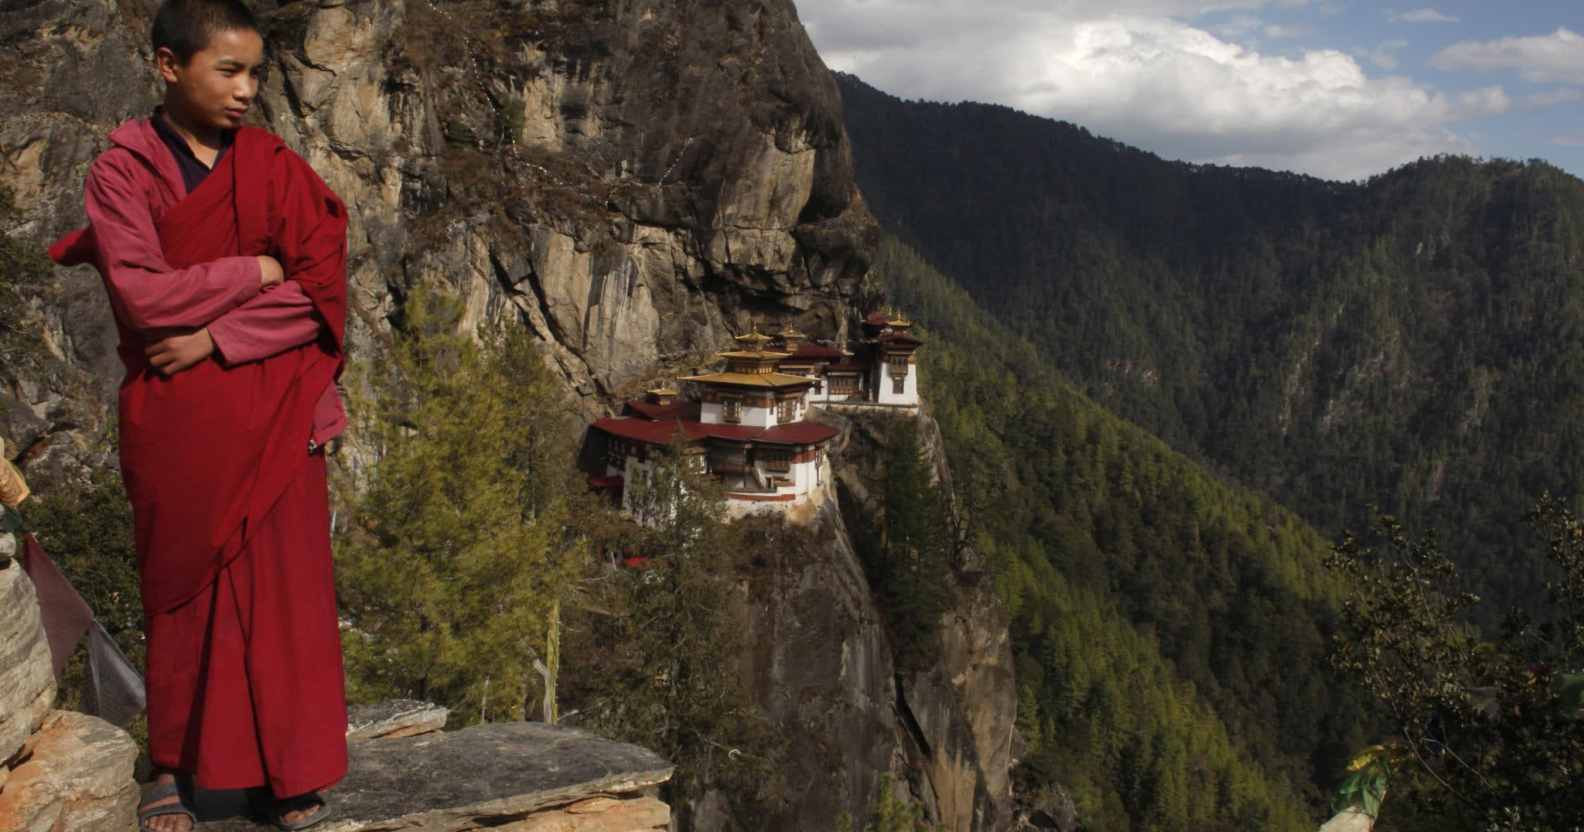 A monk stands on the mountaintops, a monastery in view behind him on the cliffs